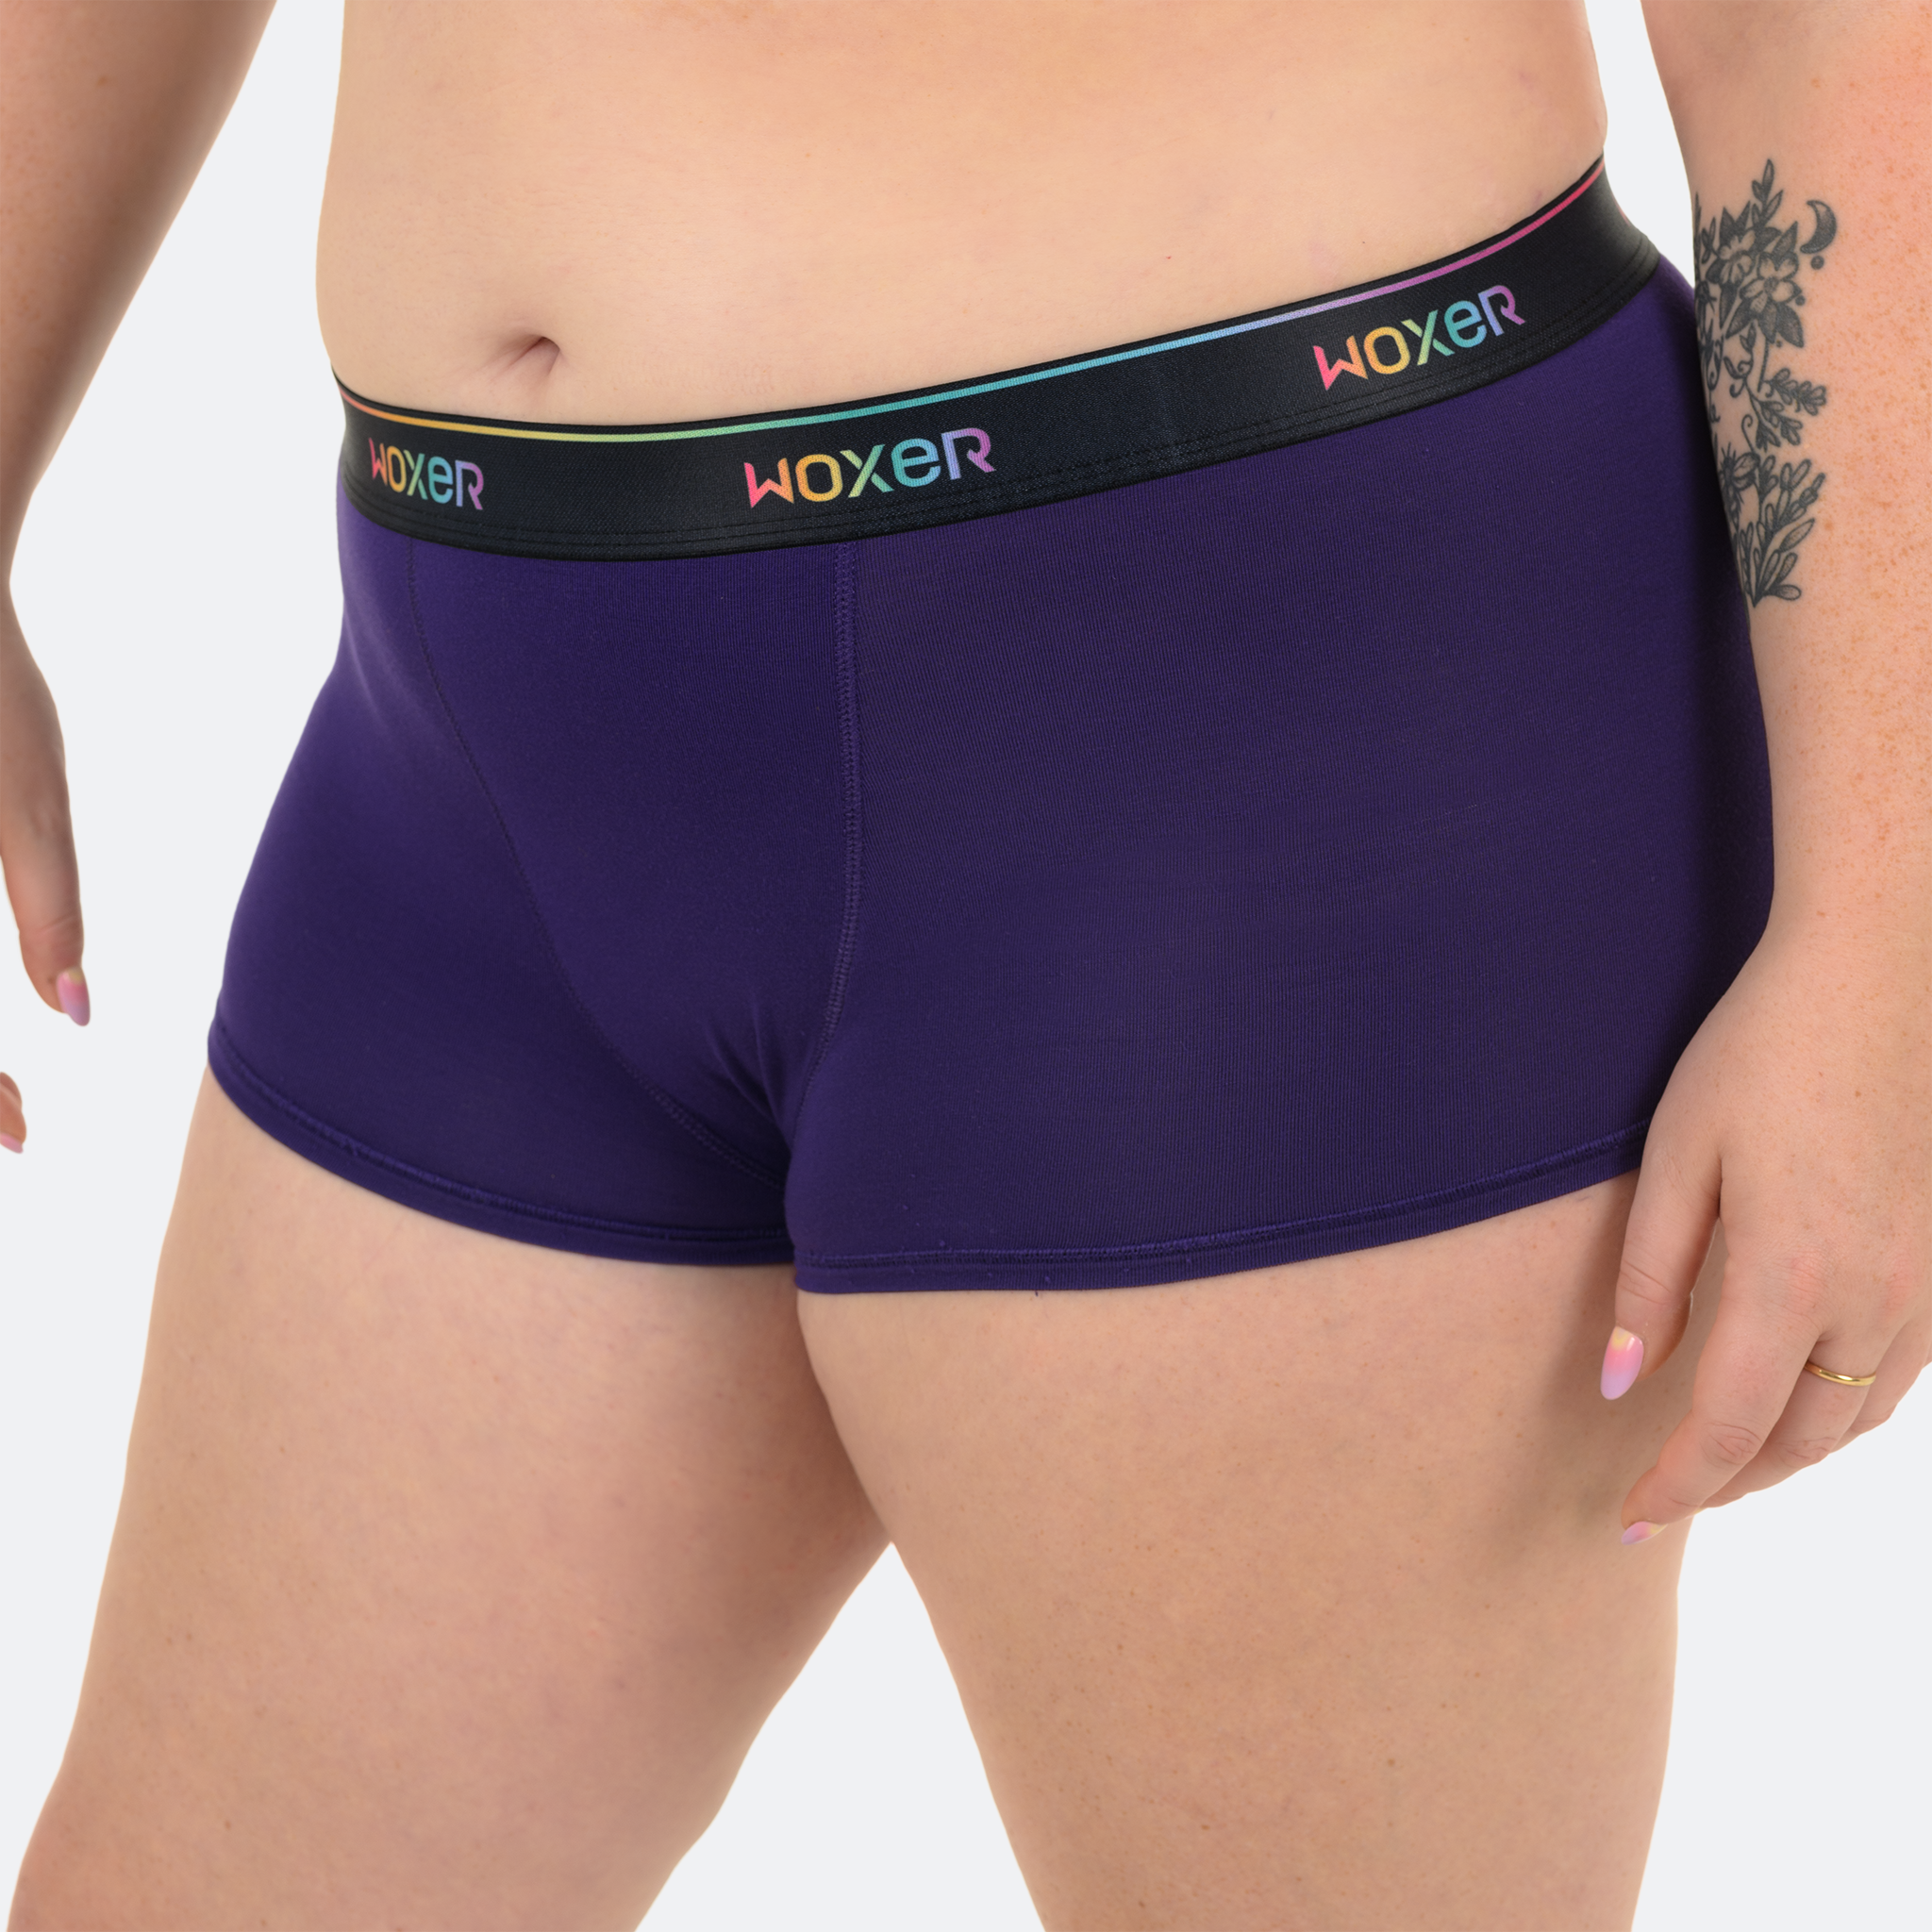 Bold Pride Force, Boxer Briefs for Women, Girls Boxer Shorts